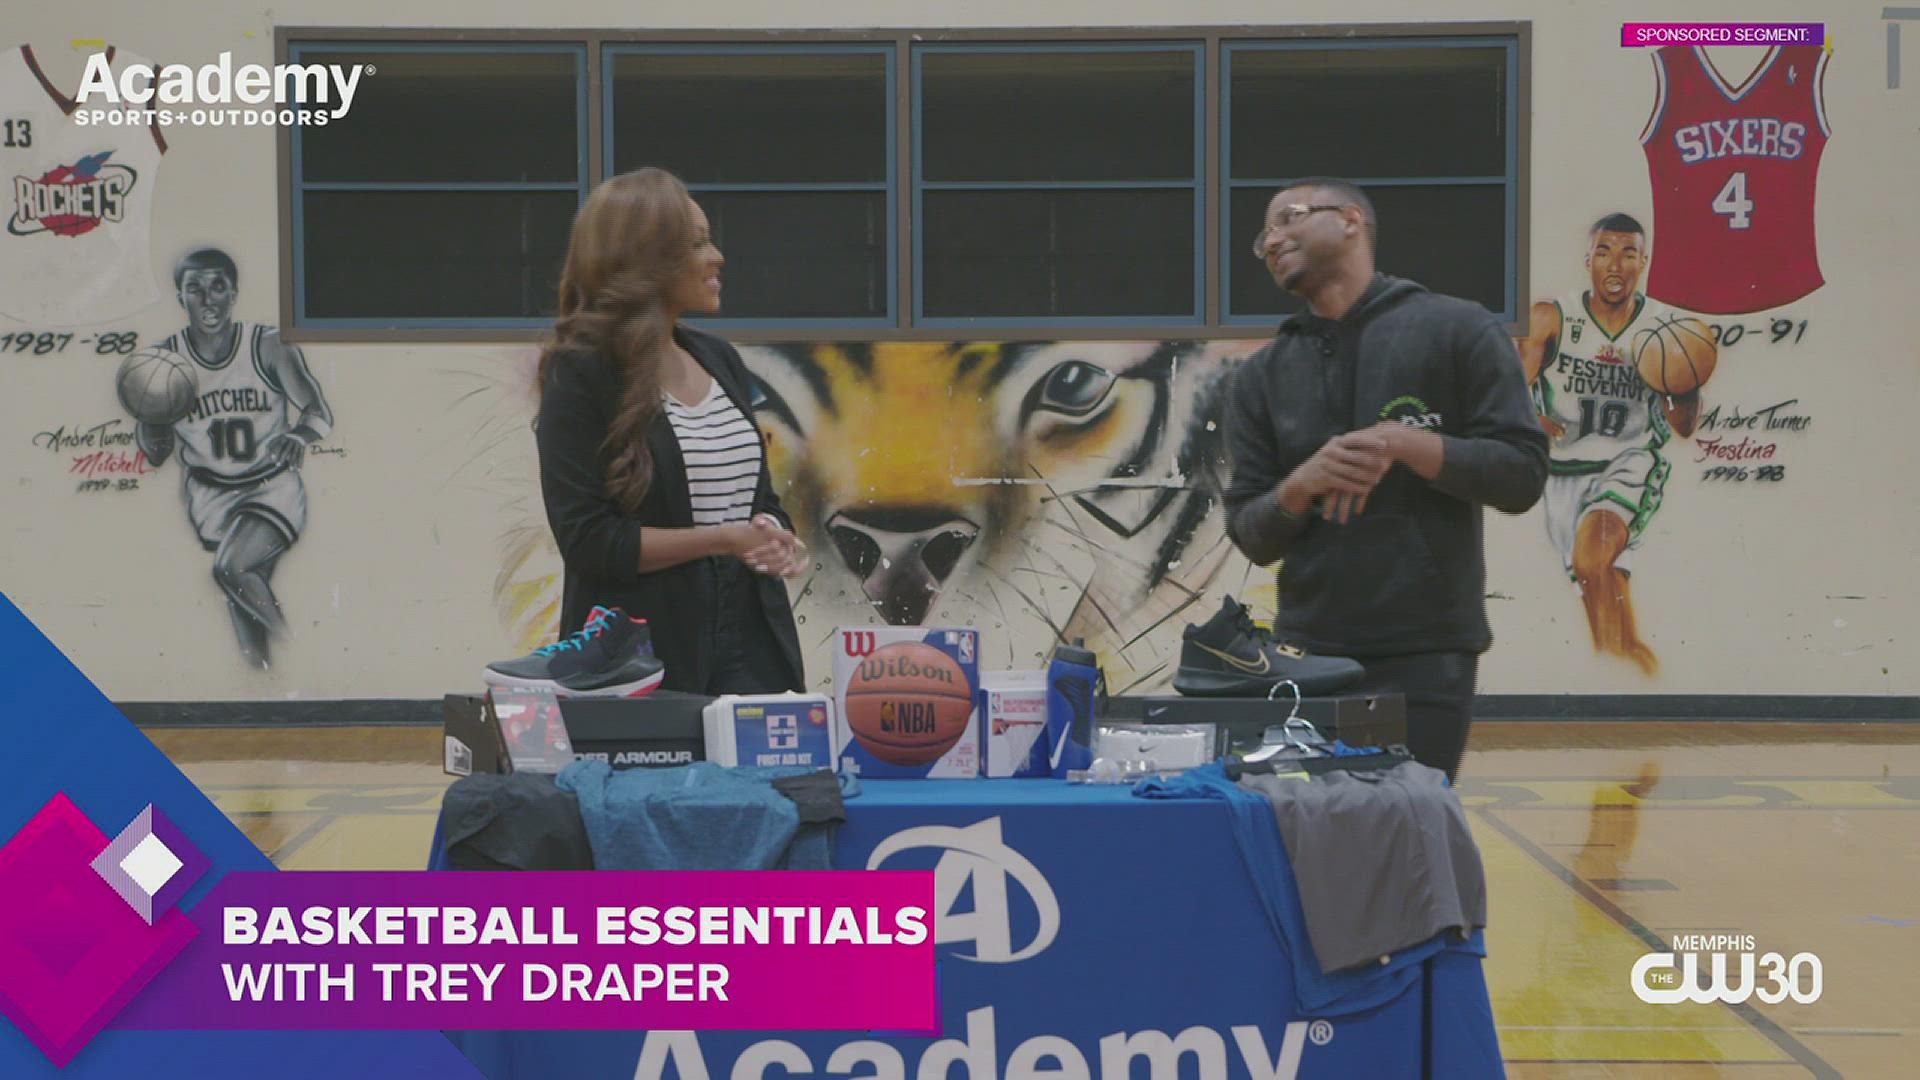 With basketball season already in full-swing, gear up with these Memphis basketball must-haves! Featuring former U of M's men's basketball player Trey Draper!